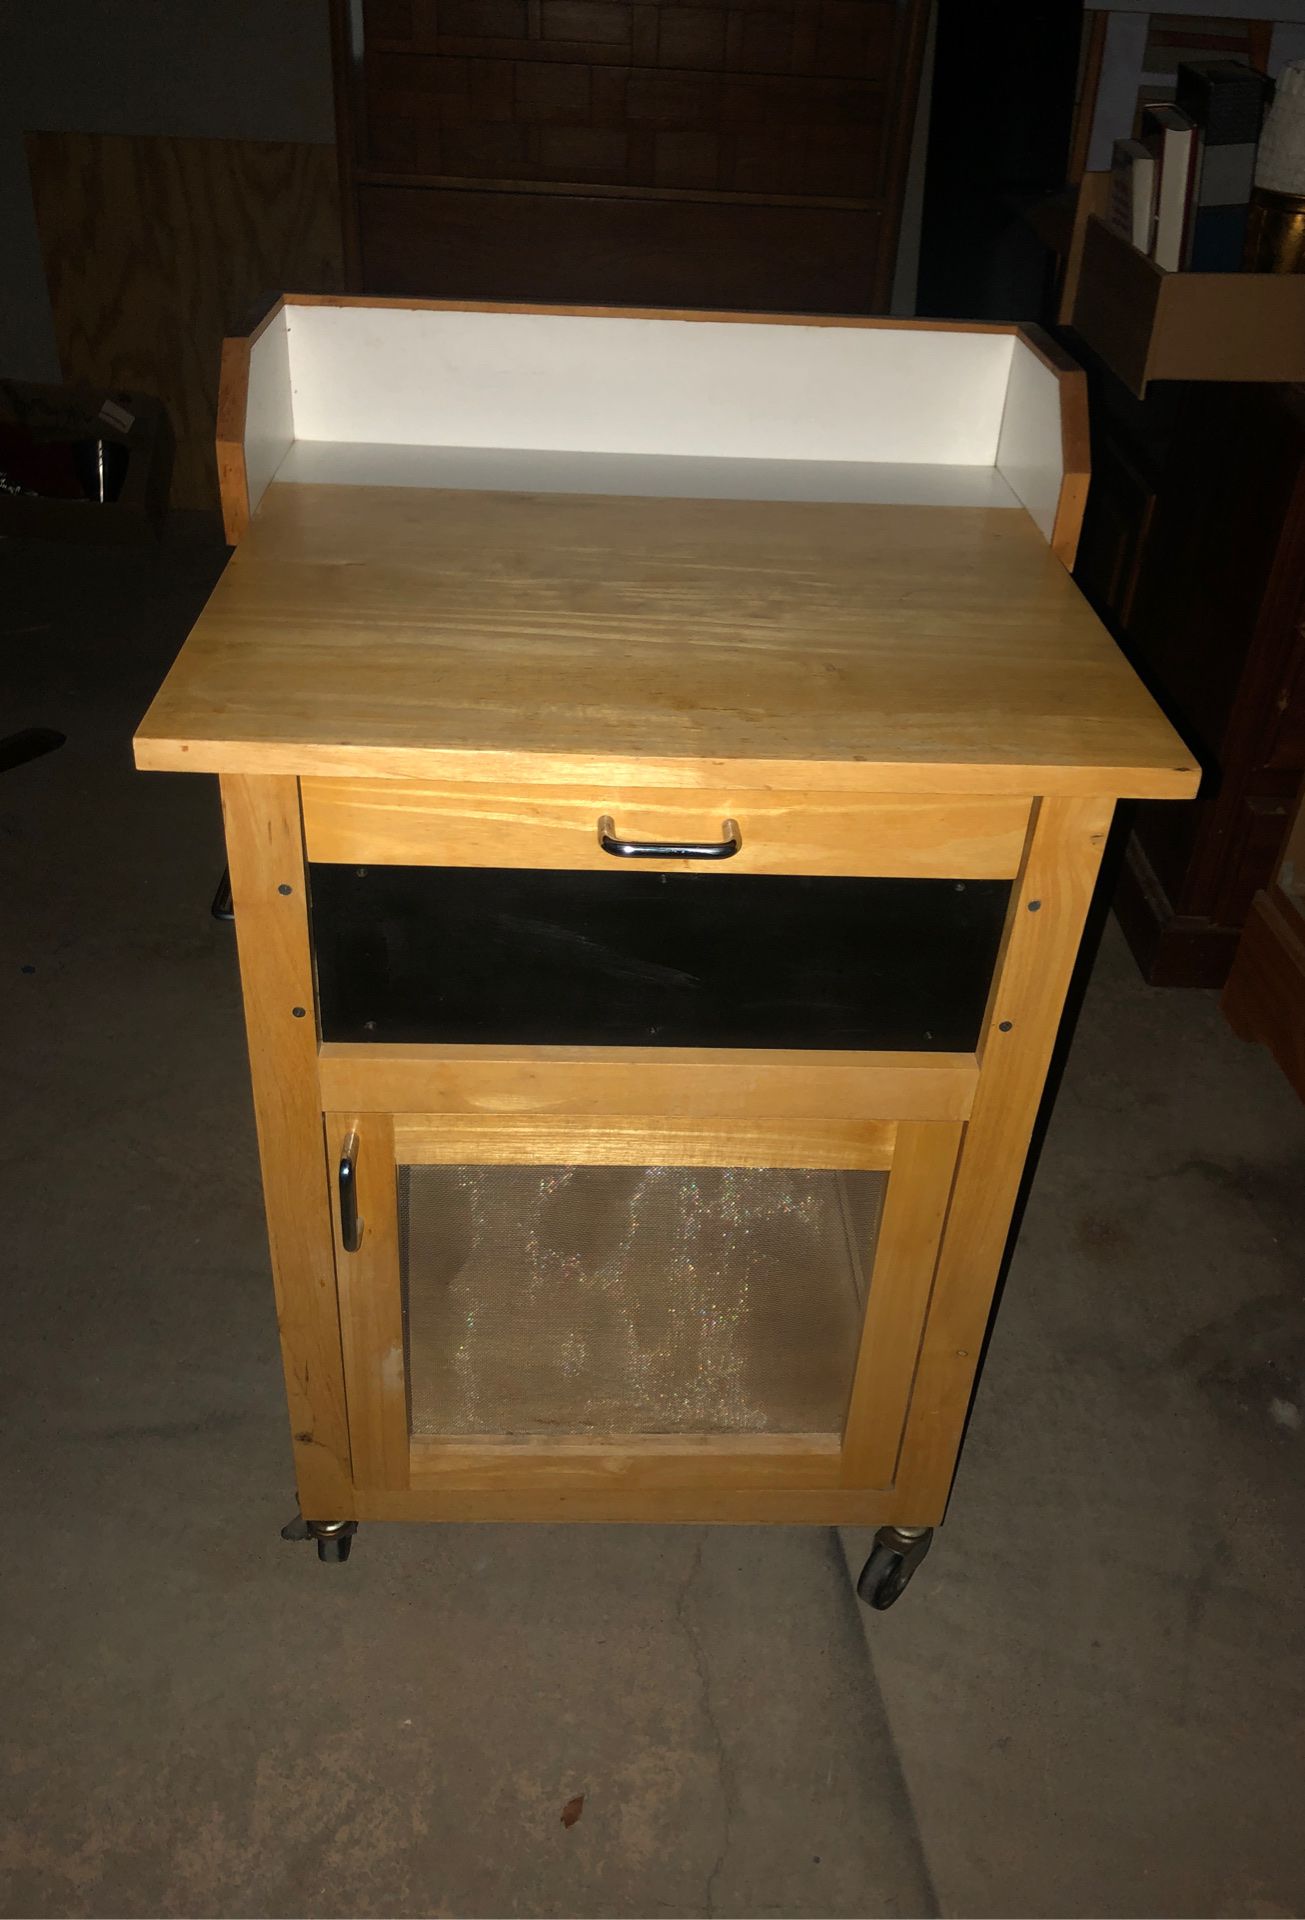 Small kitchen mobile island or craft table